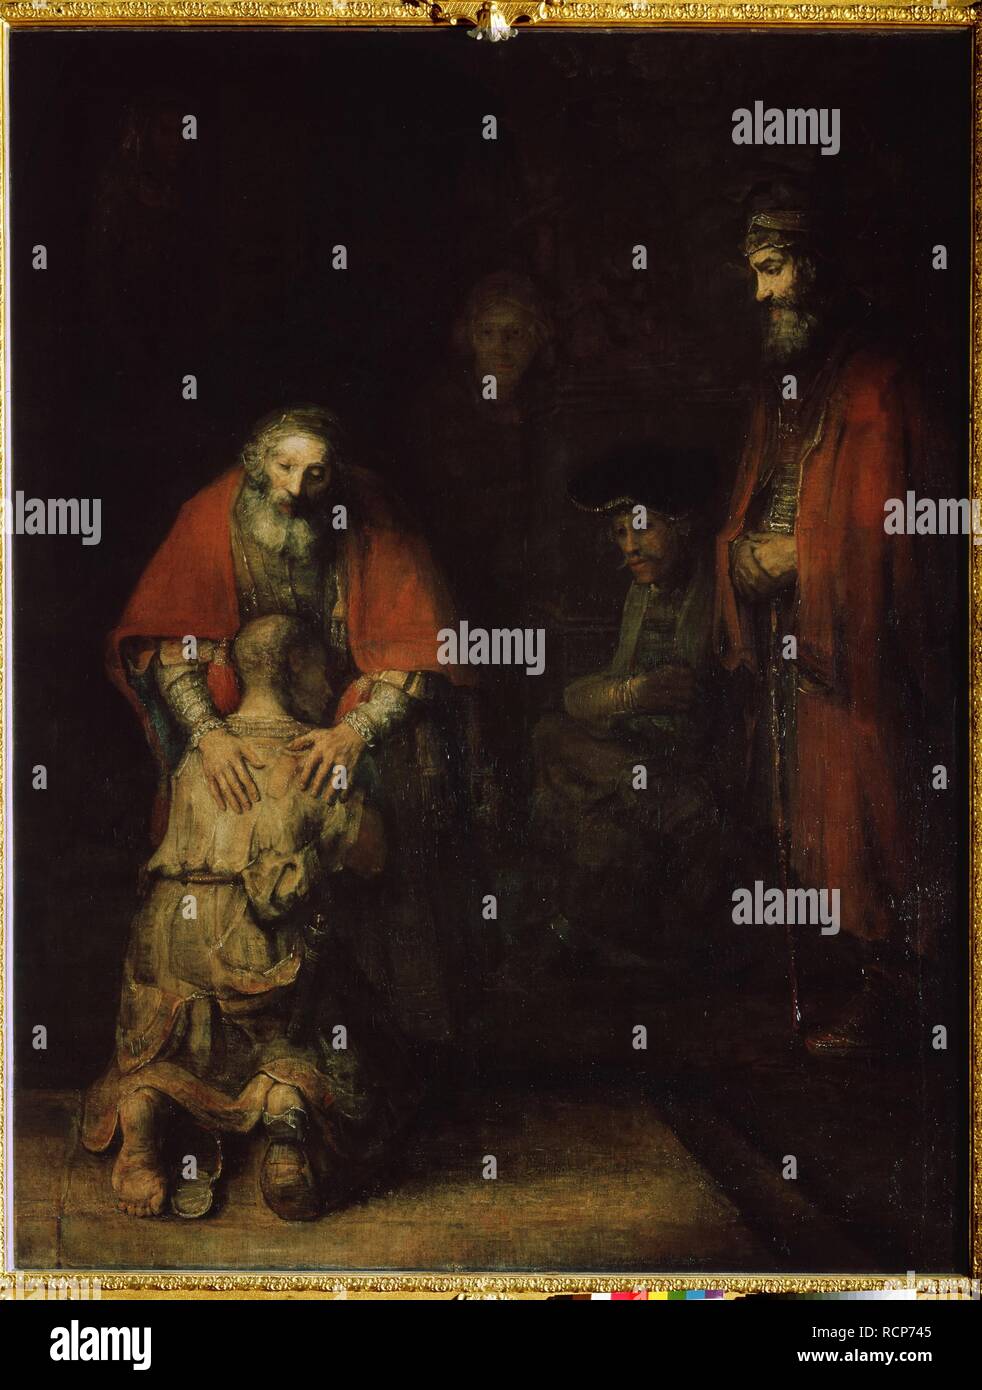 The Return of the Prodigal Son. Museum: State Hermitage, St. Petersburg. Author: Rembrandt van Rhijn. Stock Photo